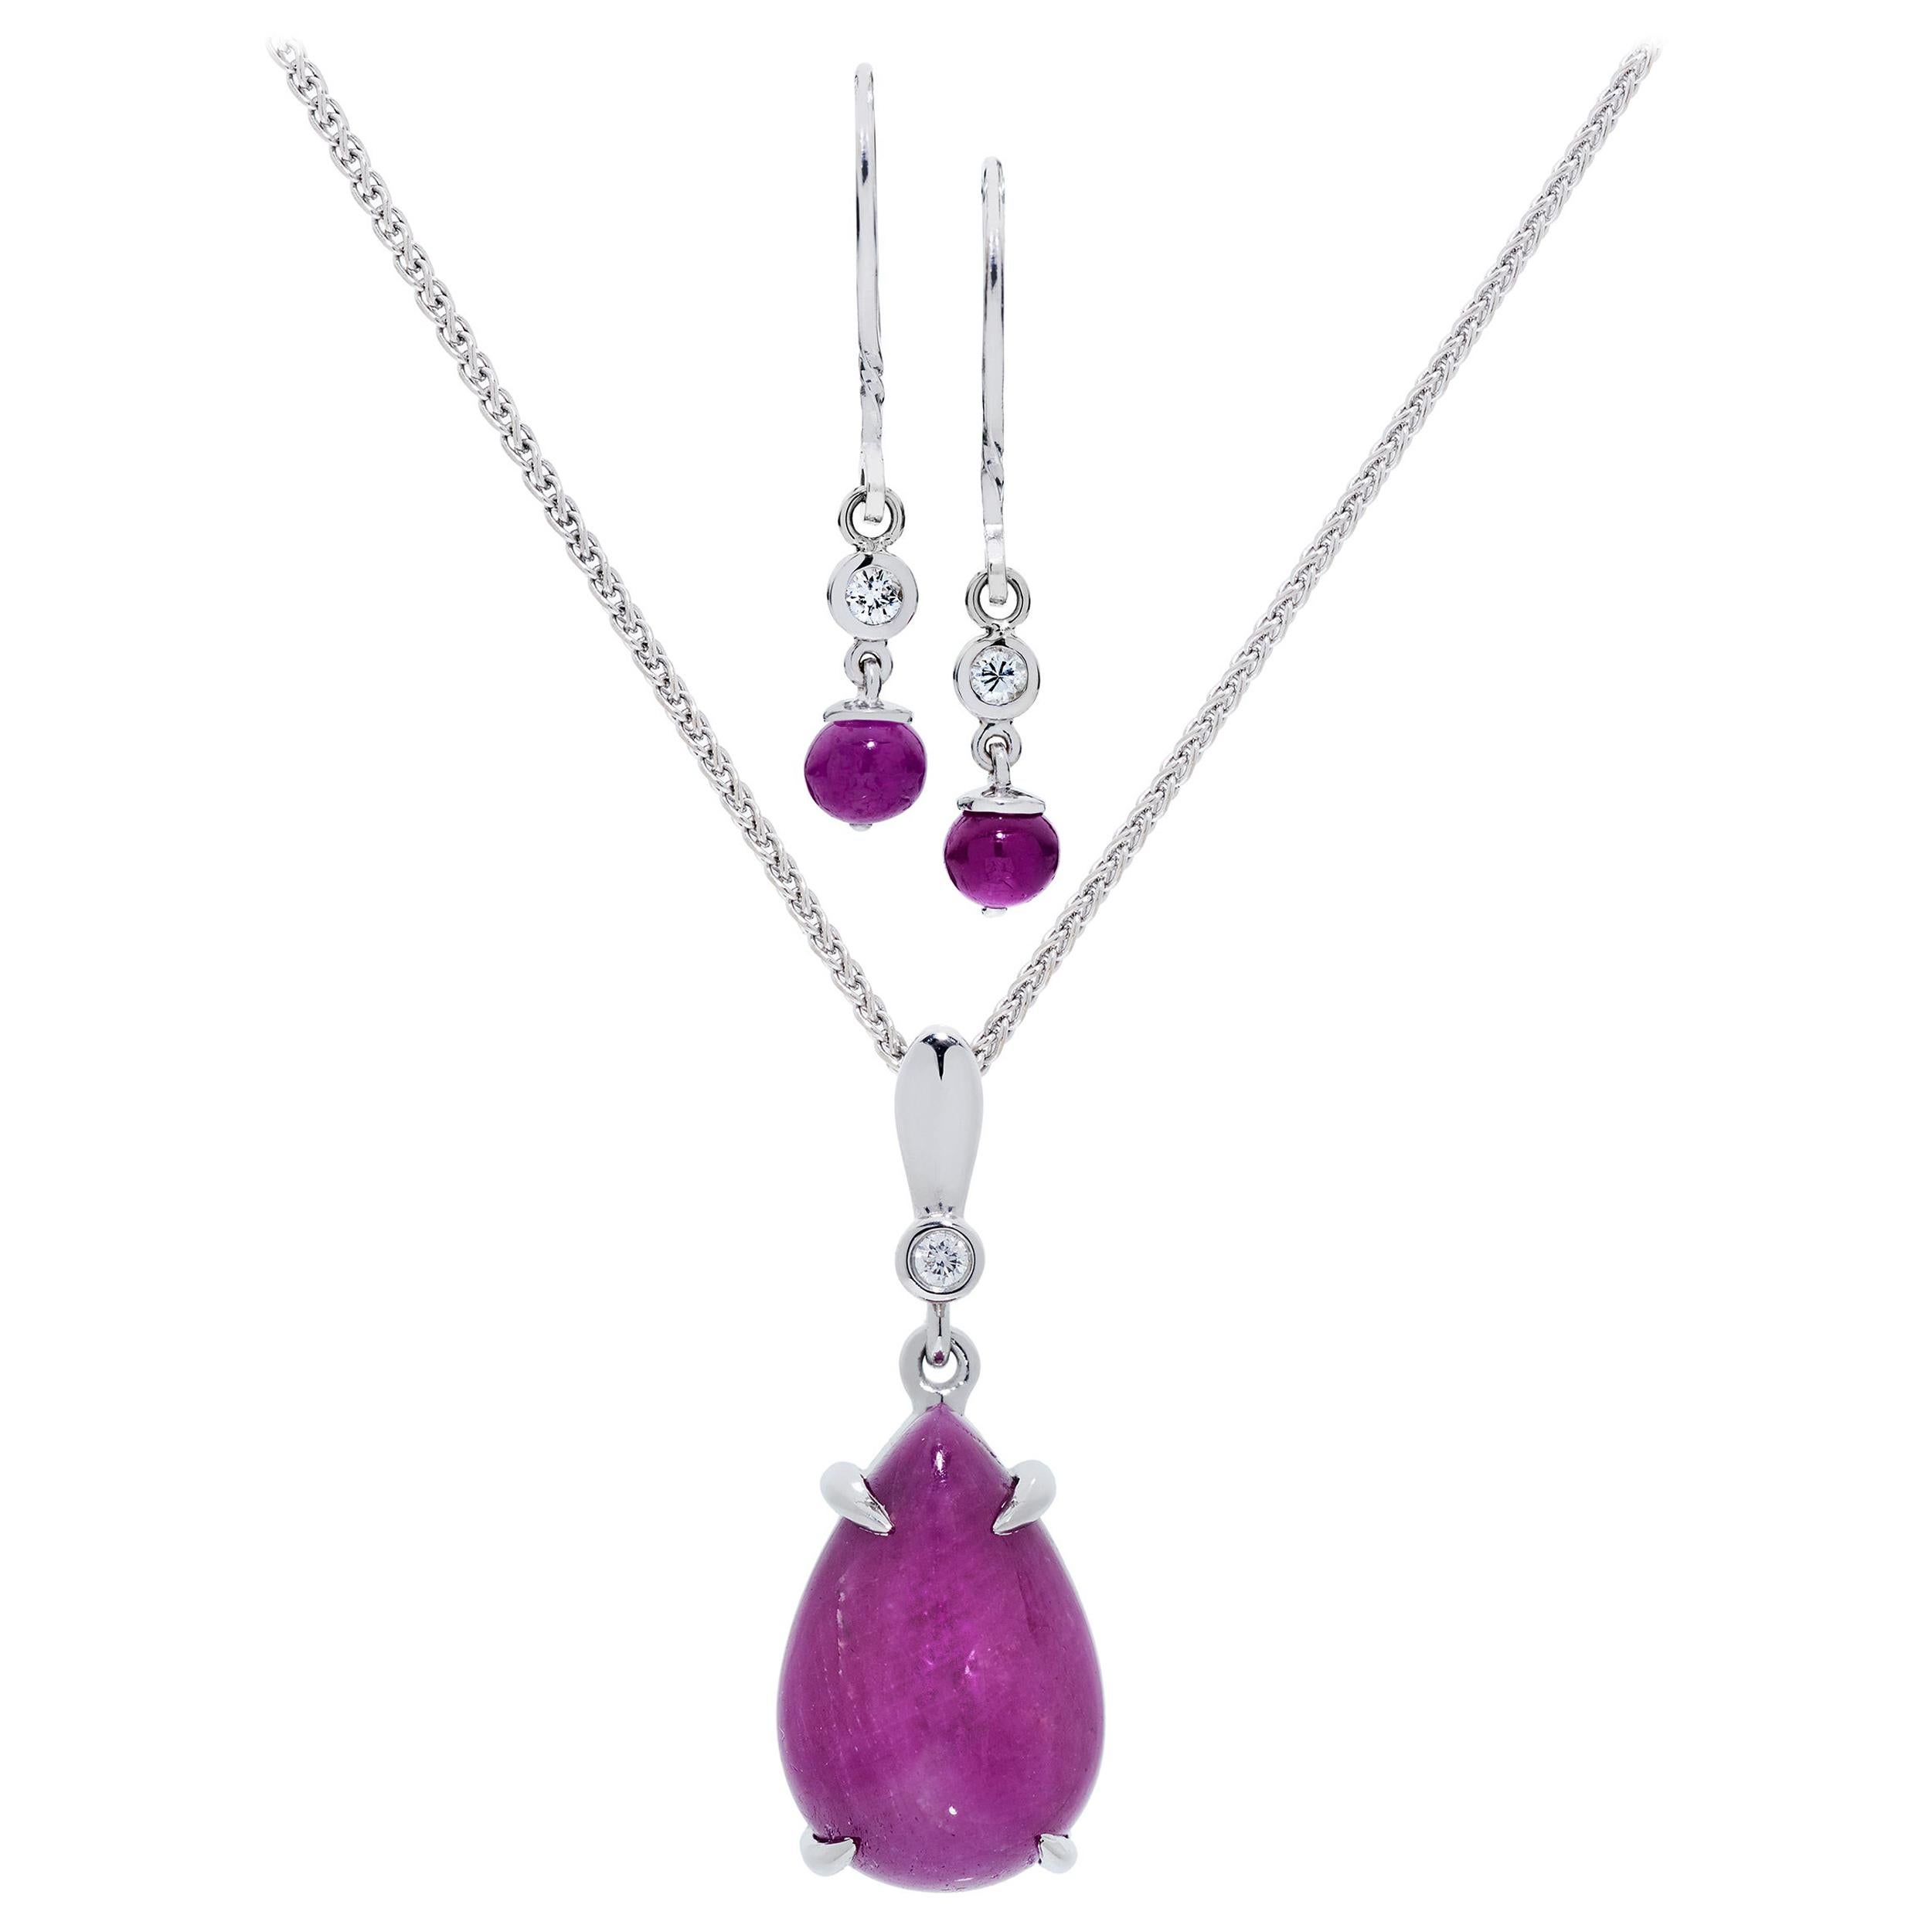 7.91 Carats Pear-Shaped Ruby Cabochon in Platinum Pendant and Earring Set For Sale